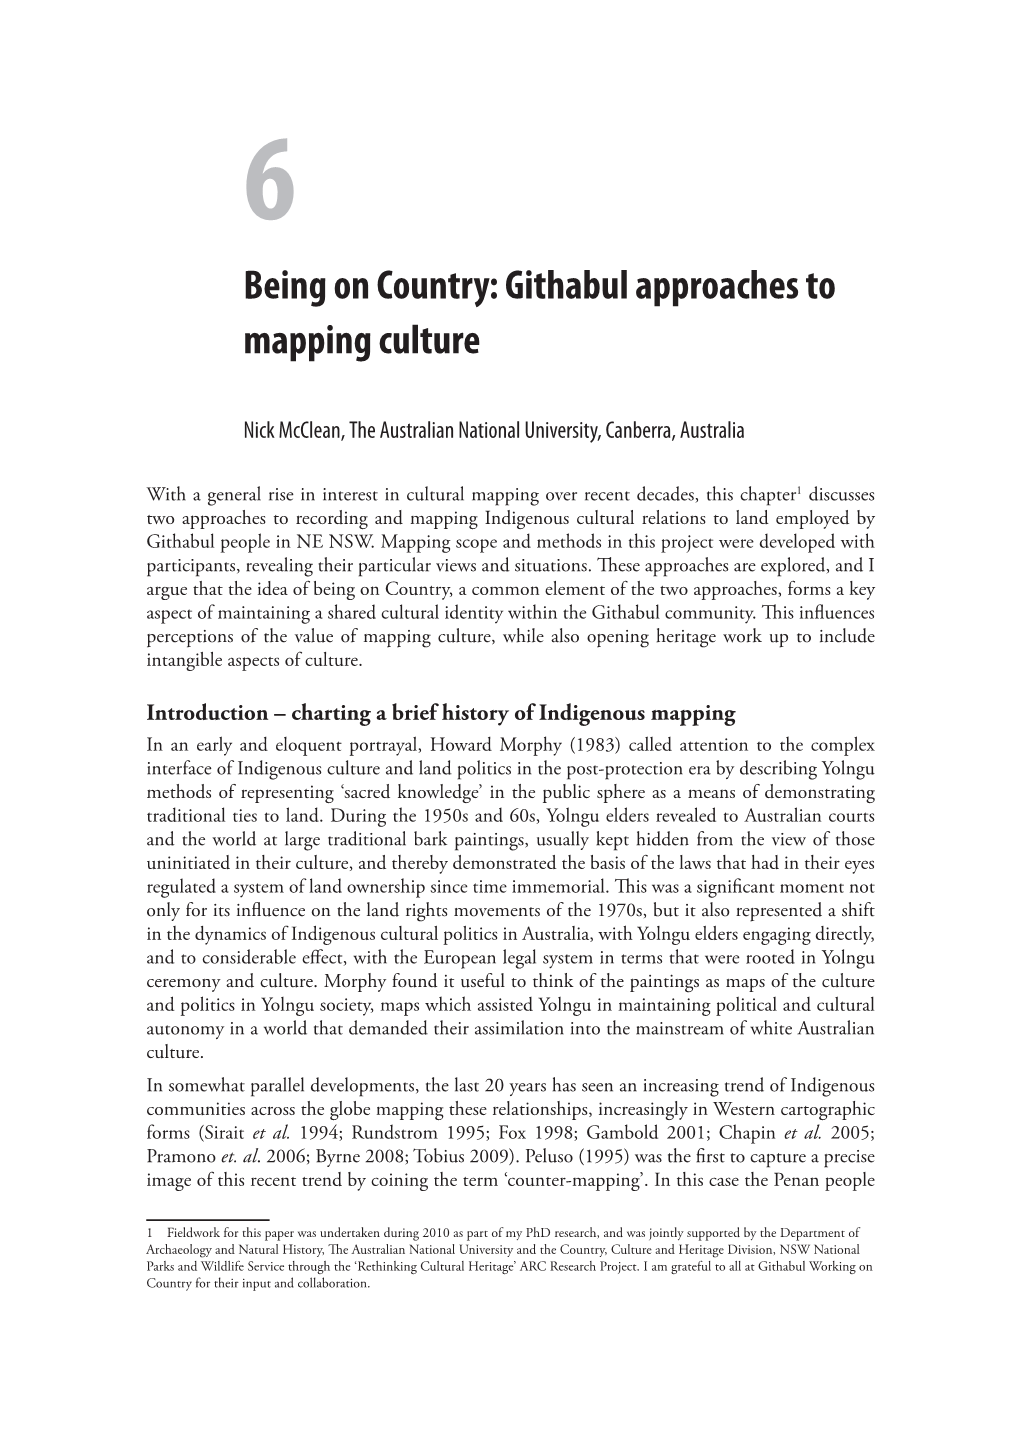 Githabul Approaches to Mapping Culture